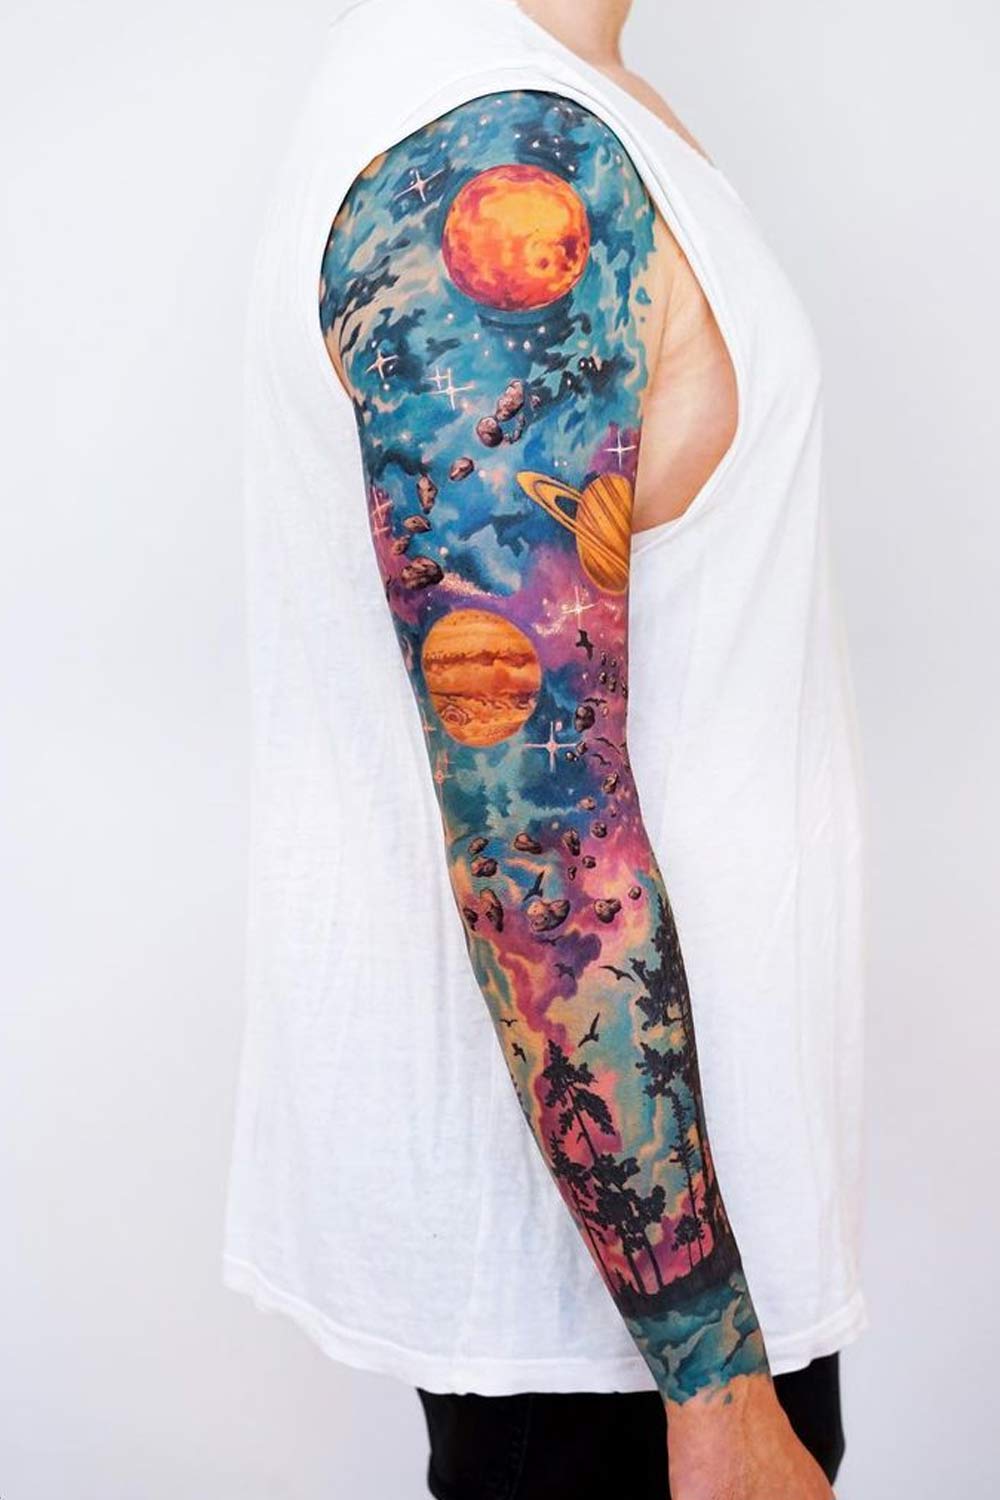 Watercolor Sleeve Tattoo With Space Theme